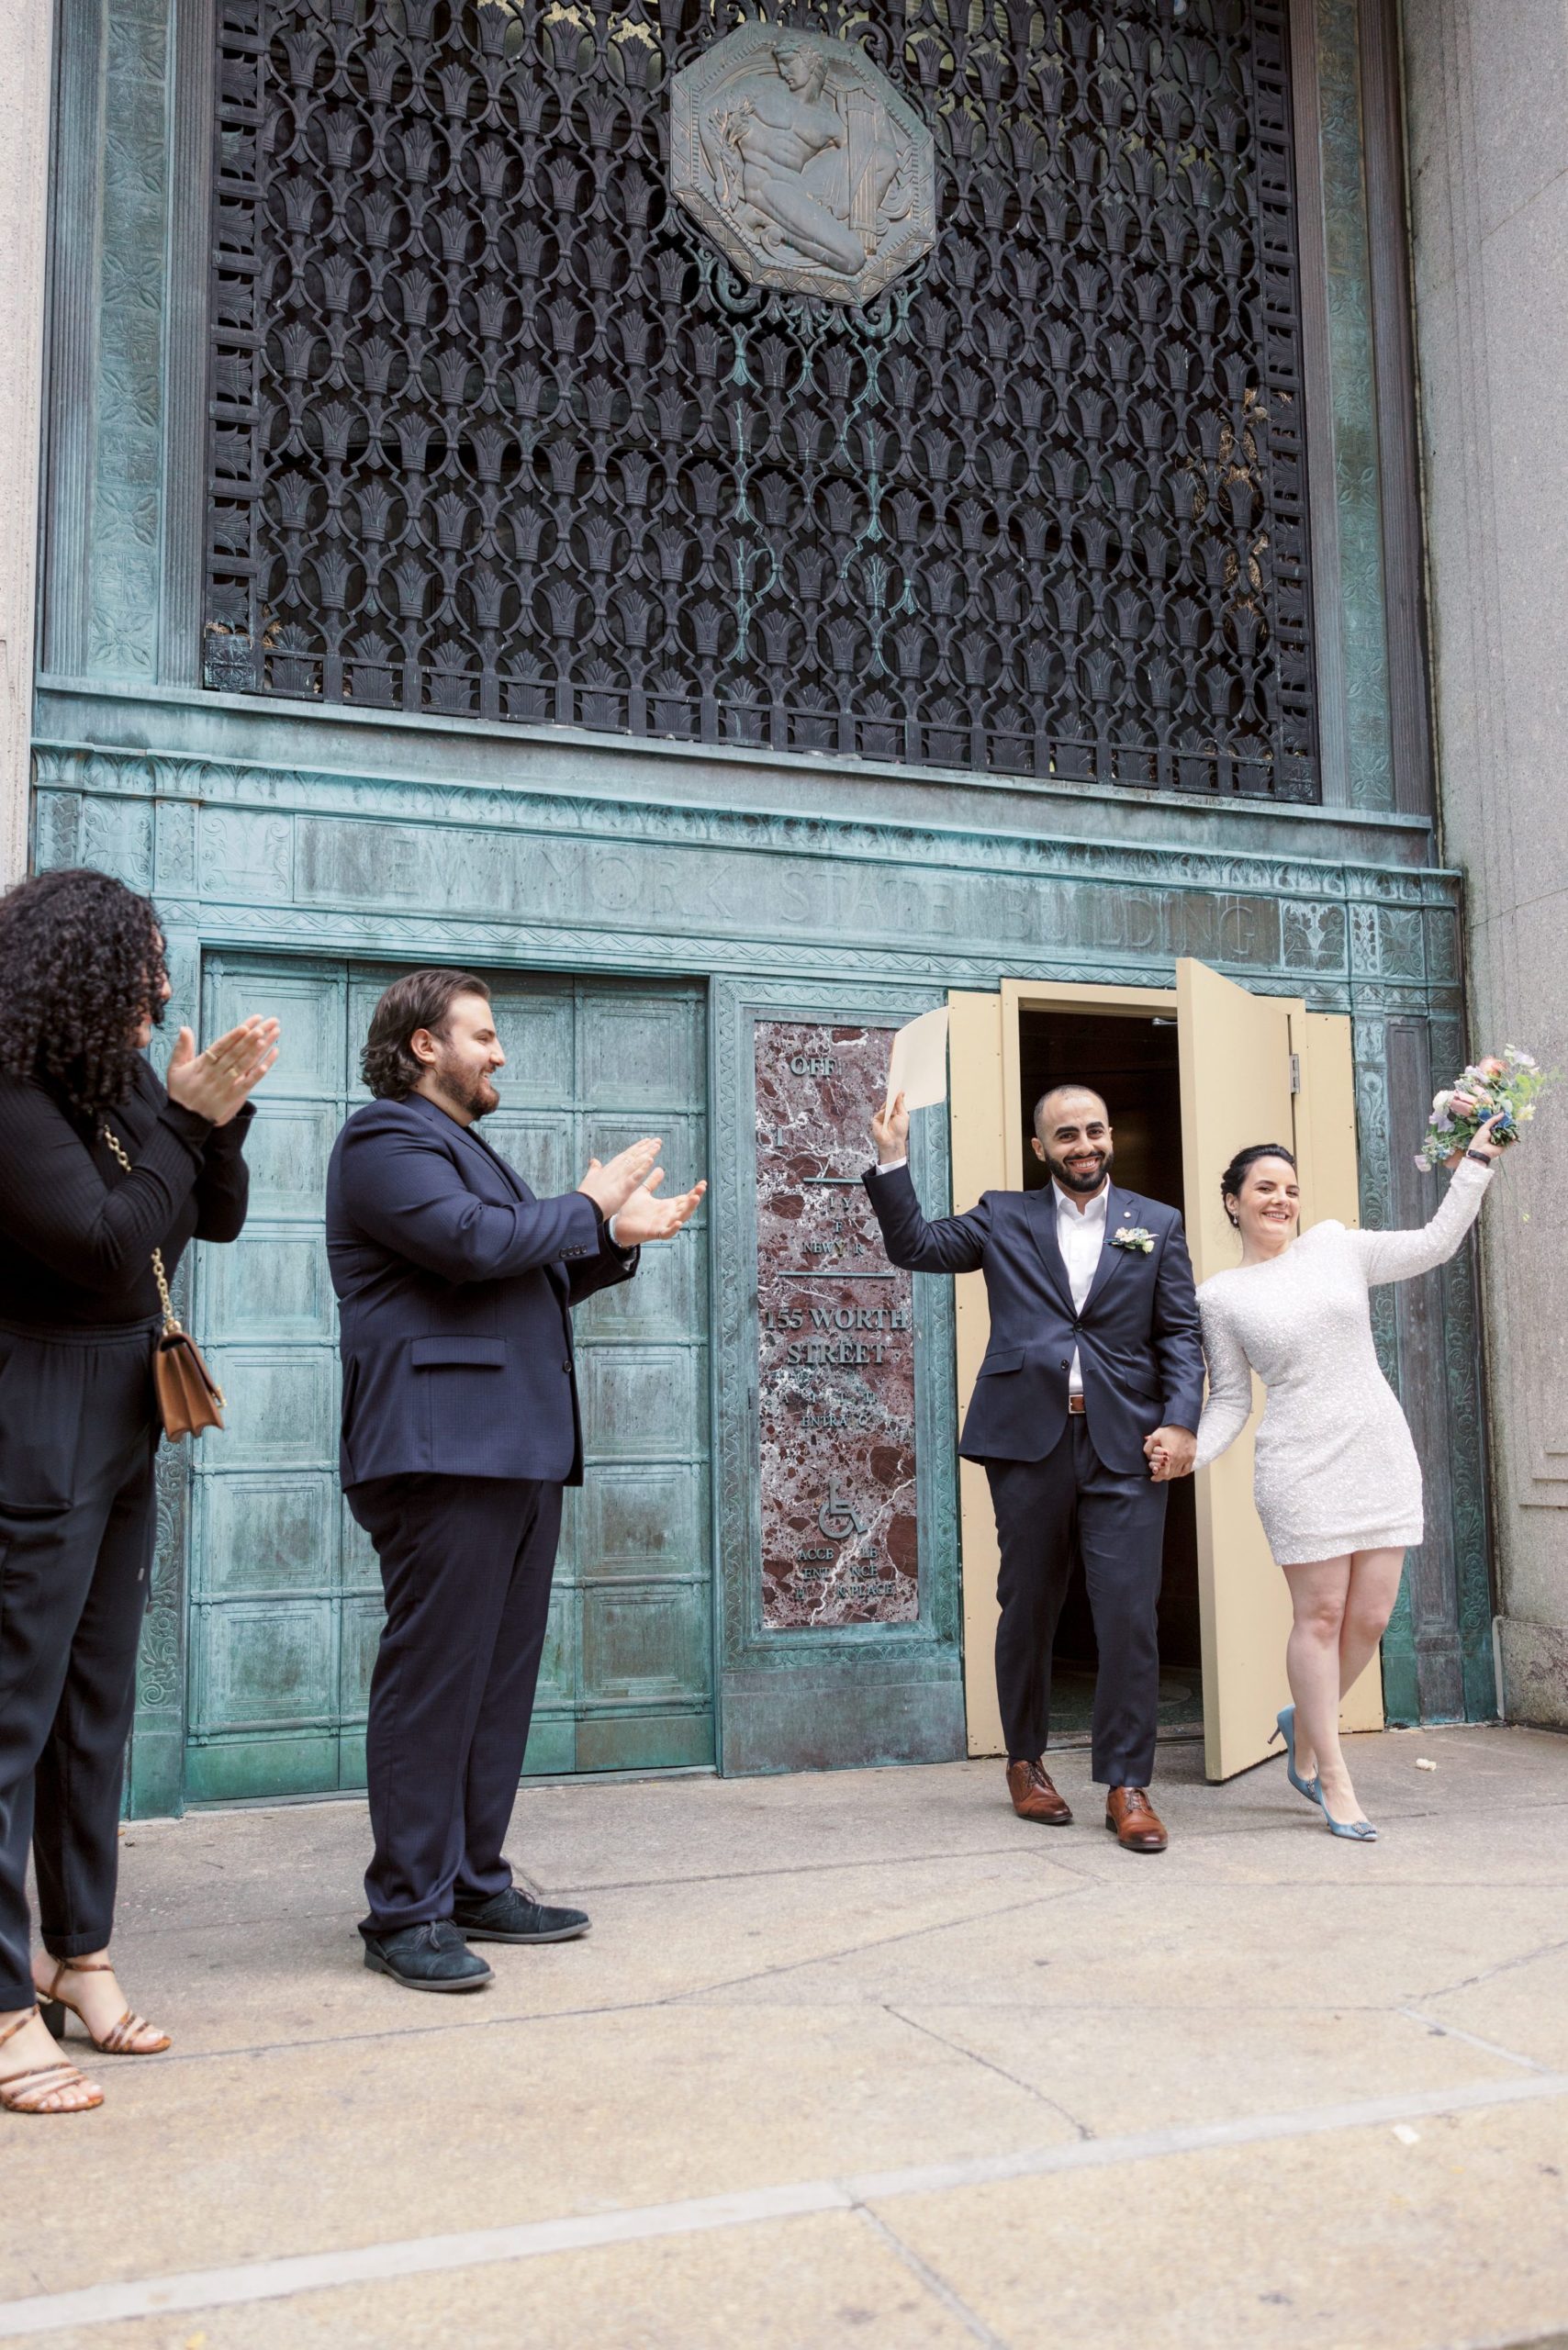 The bride and groom happily exited the NYC City Hall as their guests cheer on. Elopement image by Jenny Fu Studio